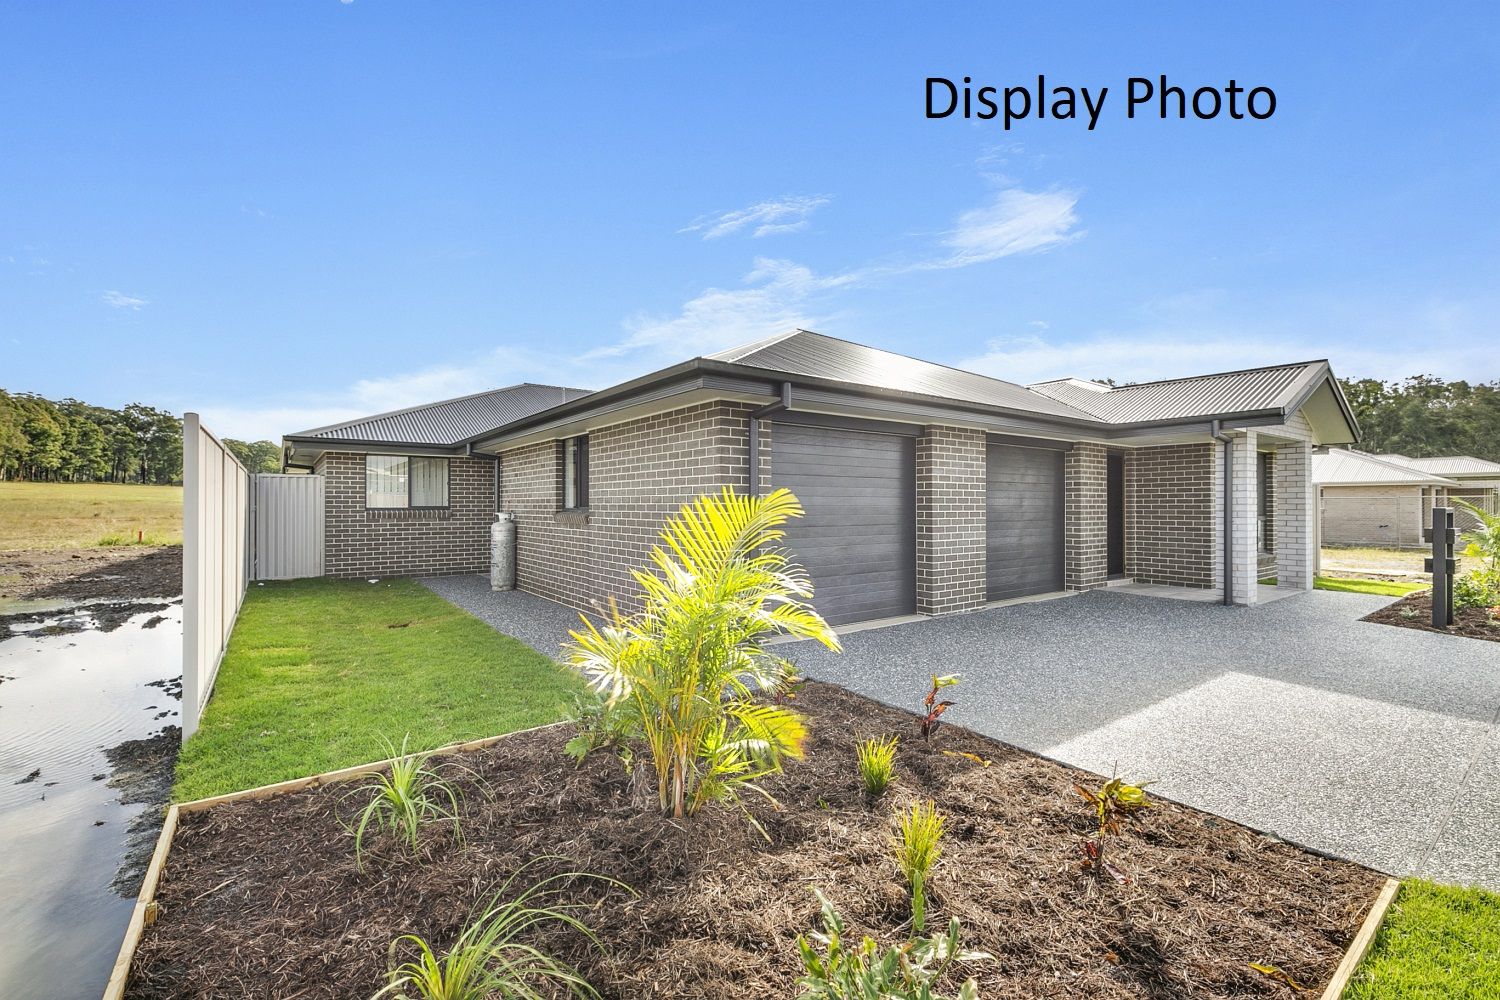 2 bedrooms Villa in 9A Seahorse Rise LAKE CATHIE NSW, 2445